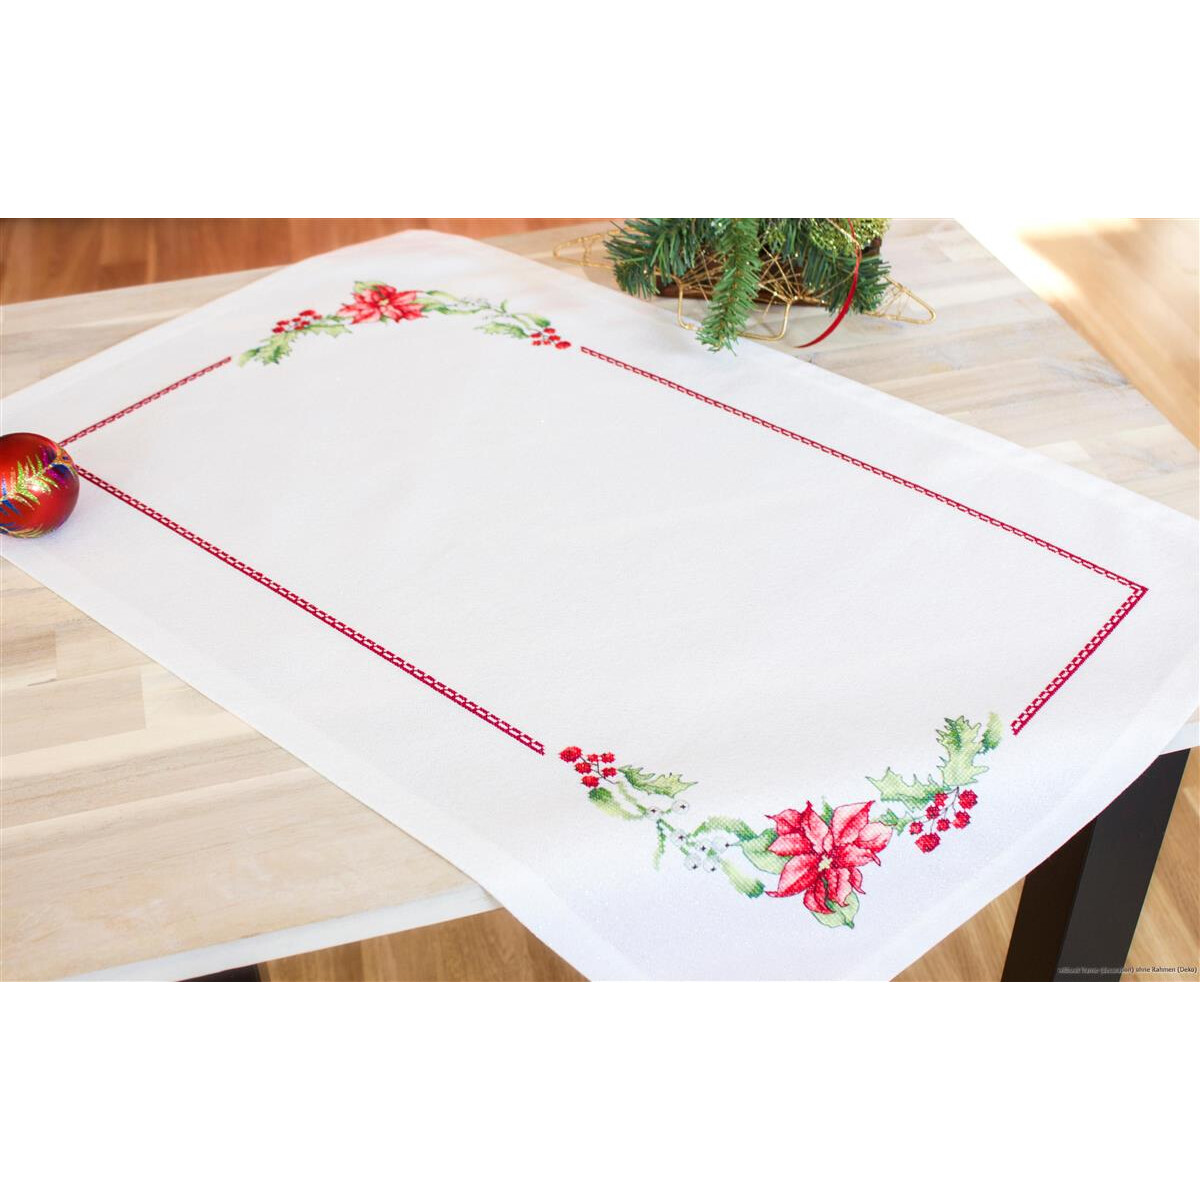 A rectangular table runner with a white background is...